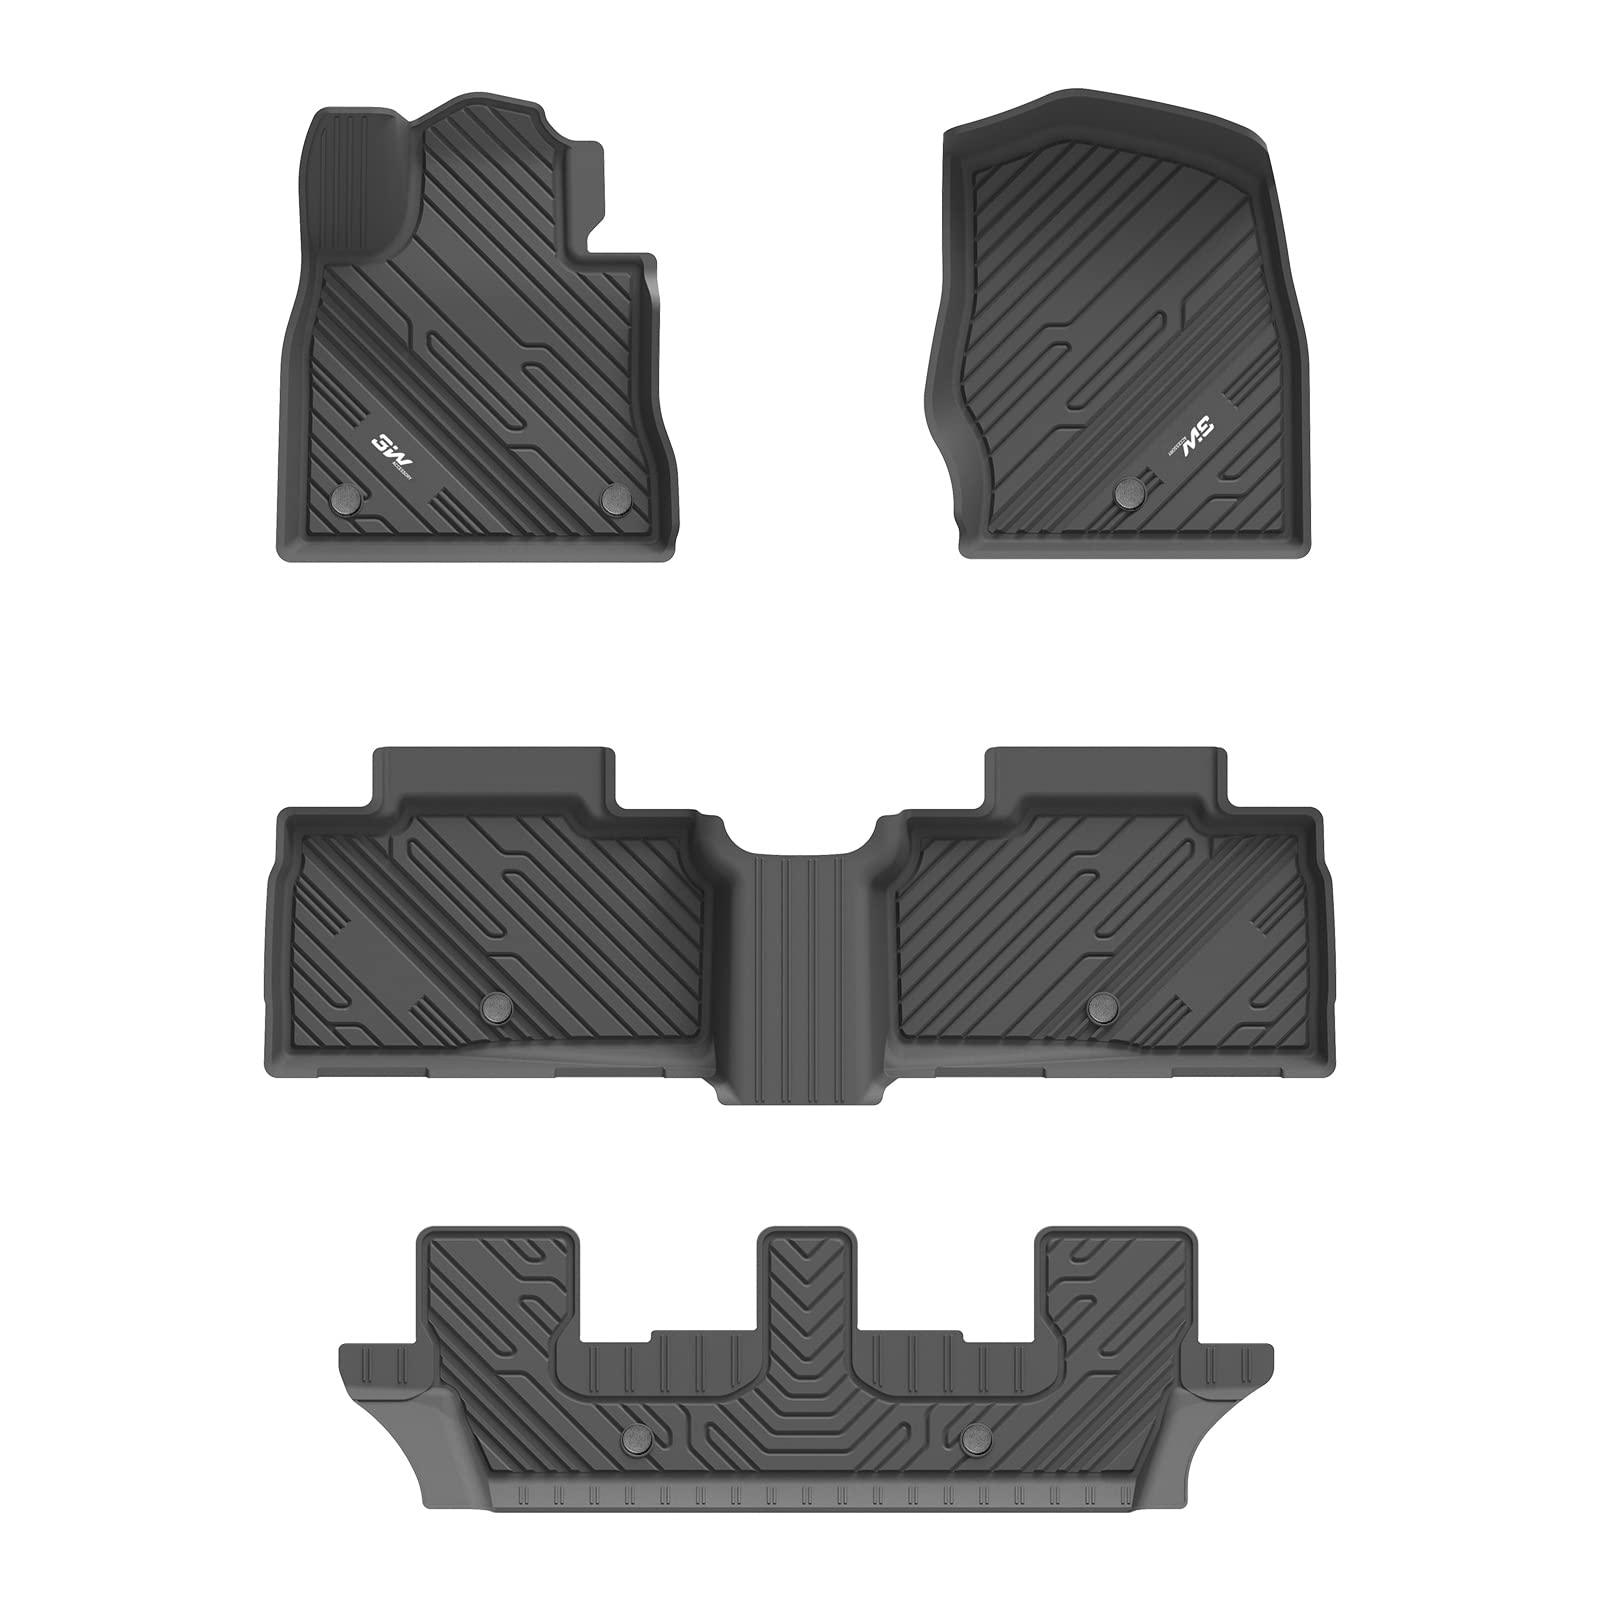 3W Ford Explorer 2020-2023 Custom Floor Mats TPE Material & All-Weather Protection Vehicles & Parts 3Wliners 2020-2023 Explorer 2020-2023 7 Seat 1st&2nd&3rd Row Mats